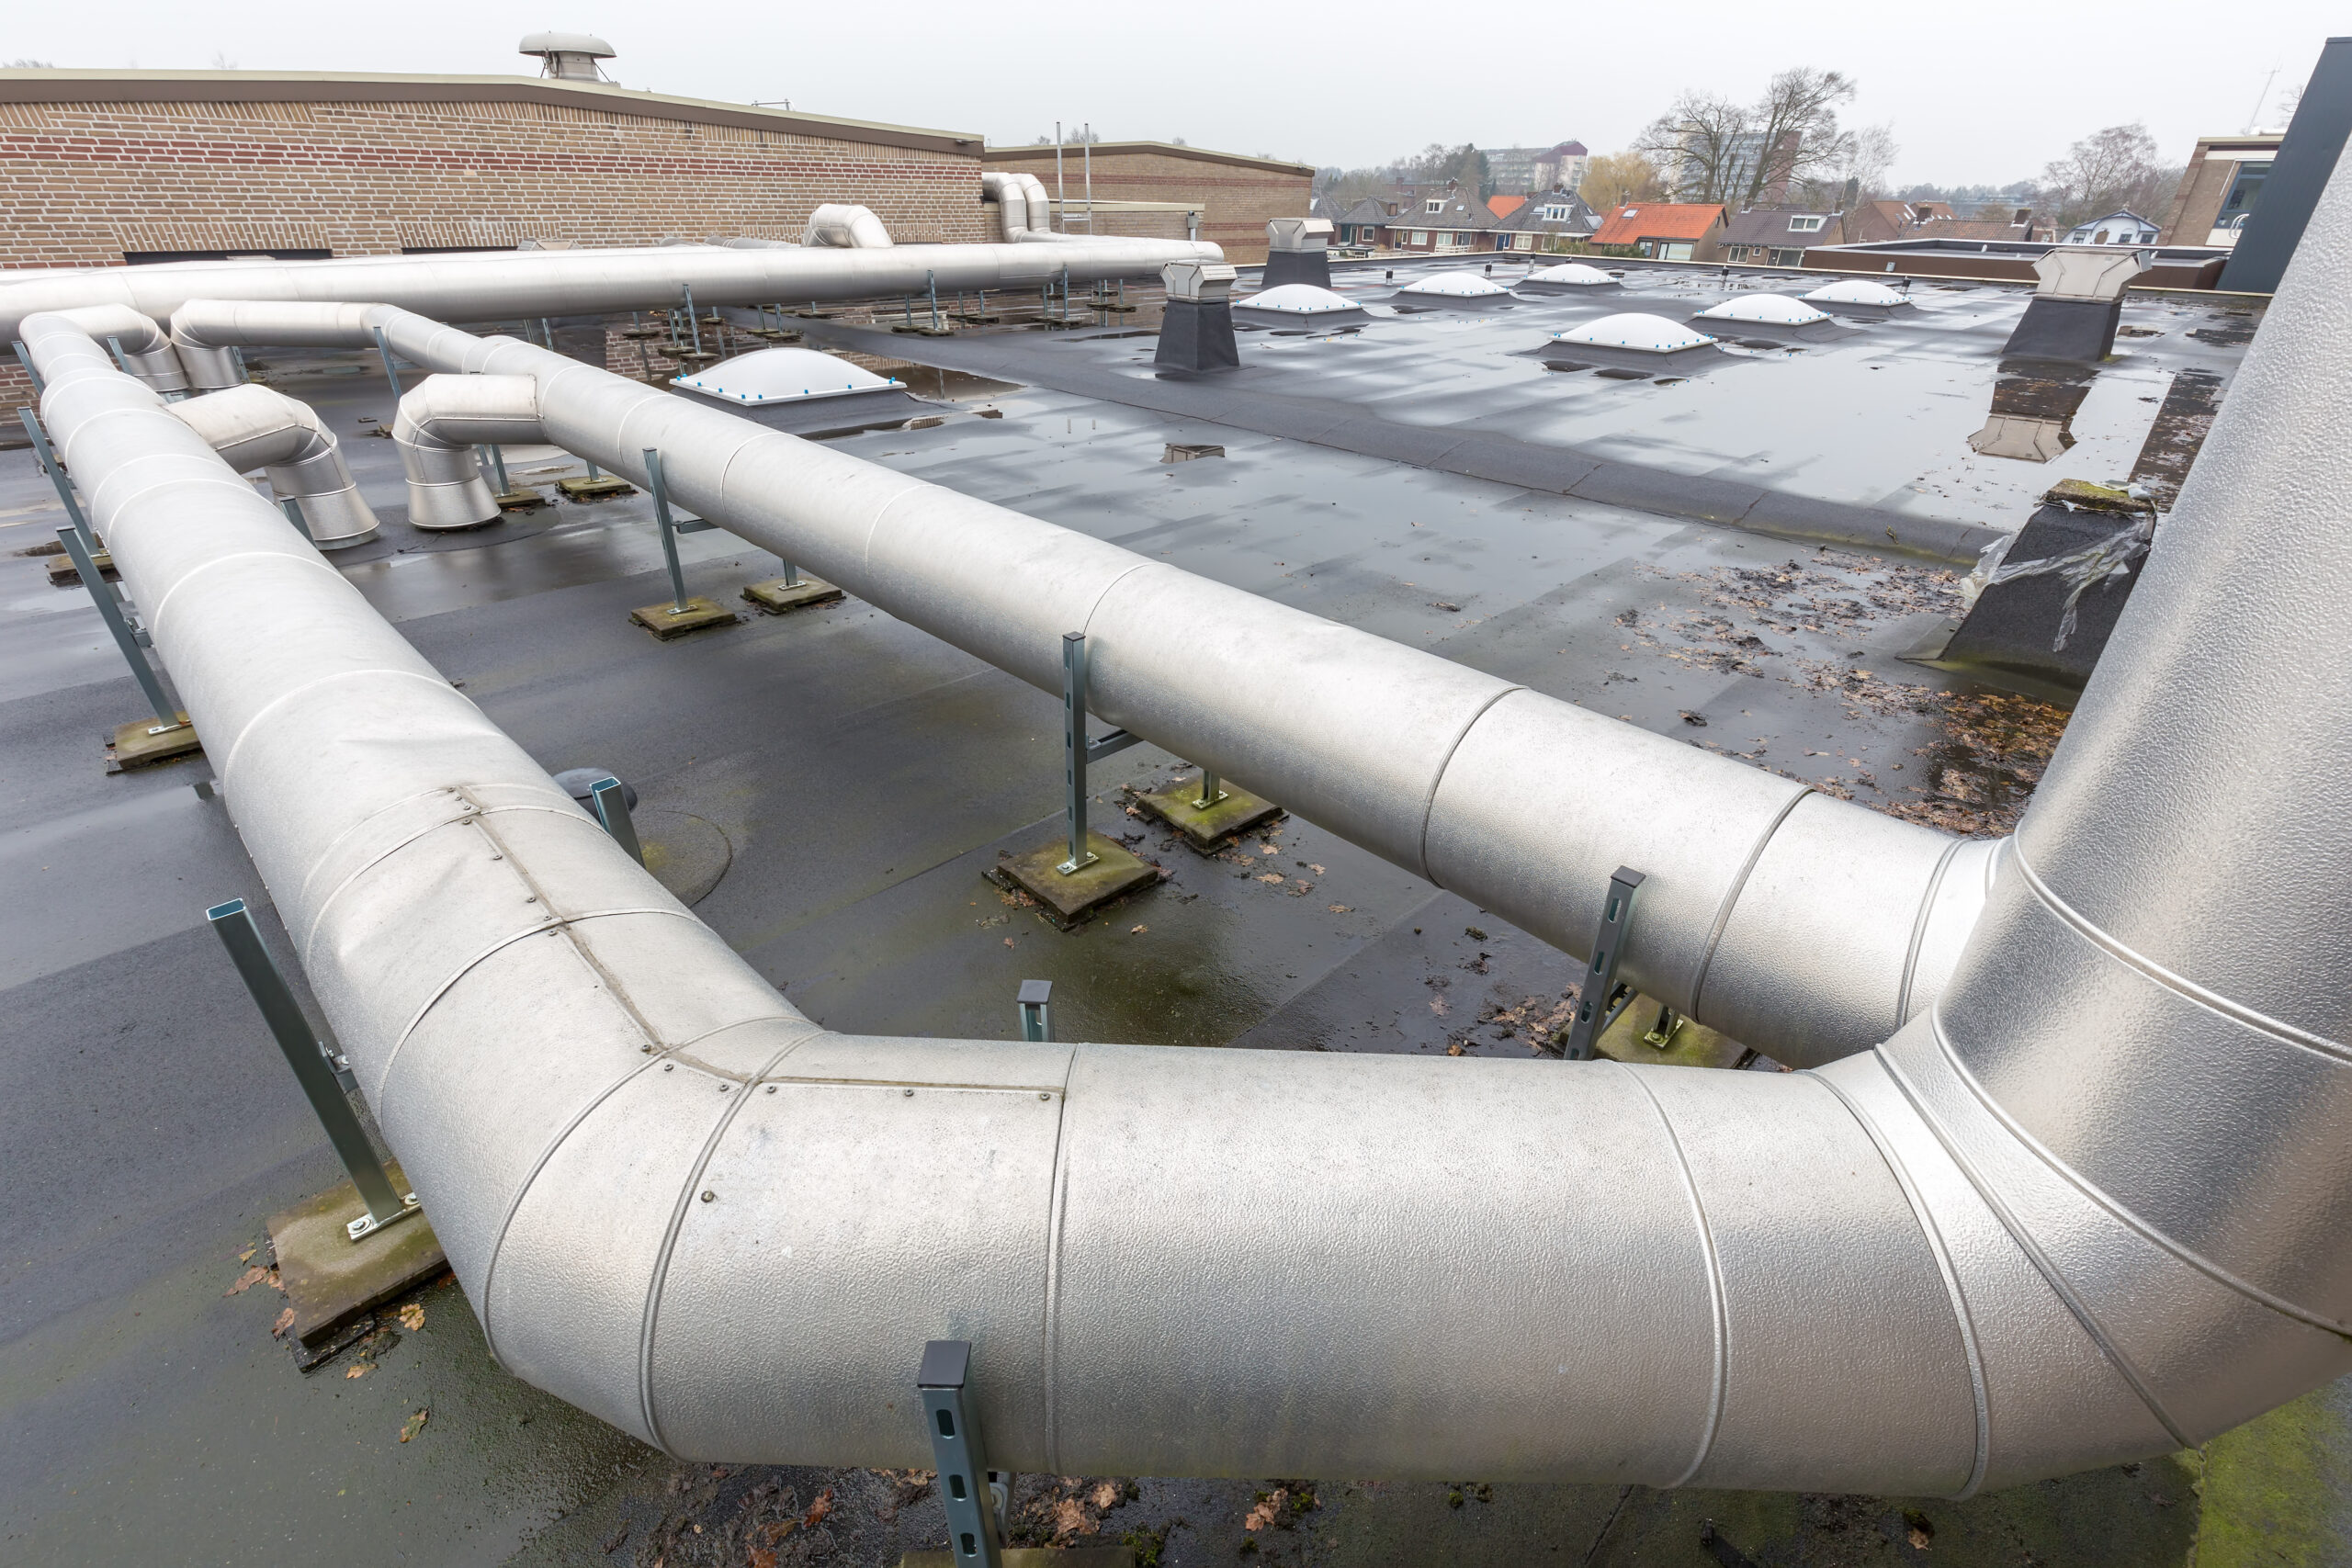 Metal pipes for ventilation system on flat roof of school